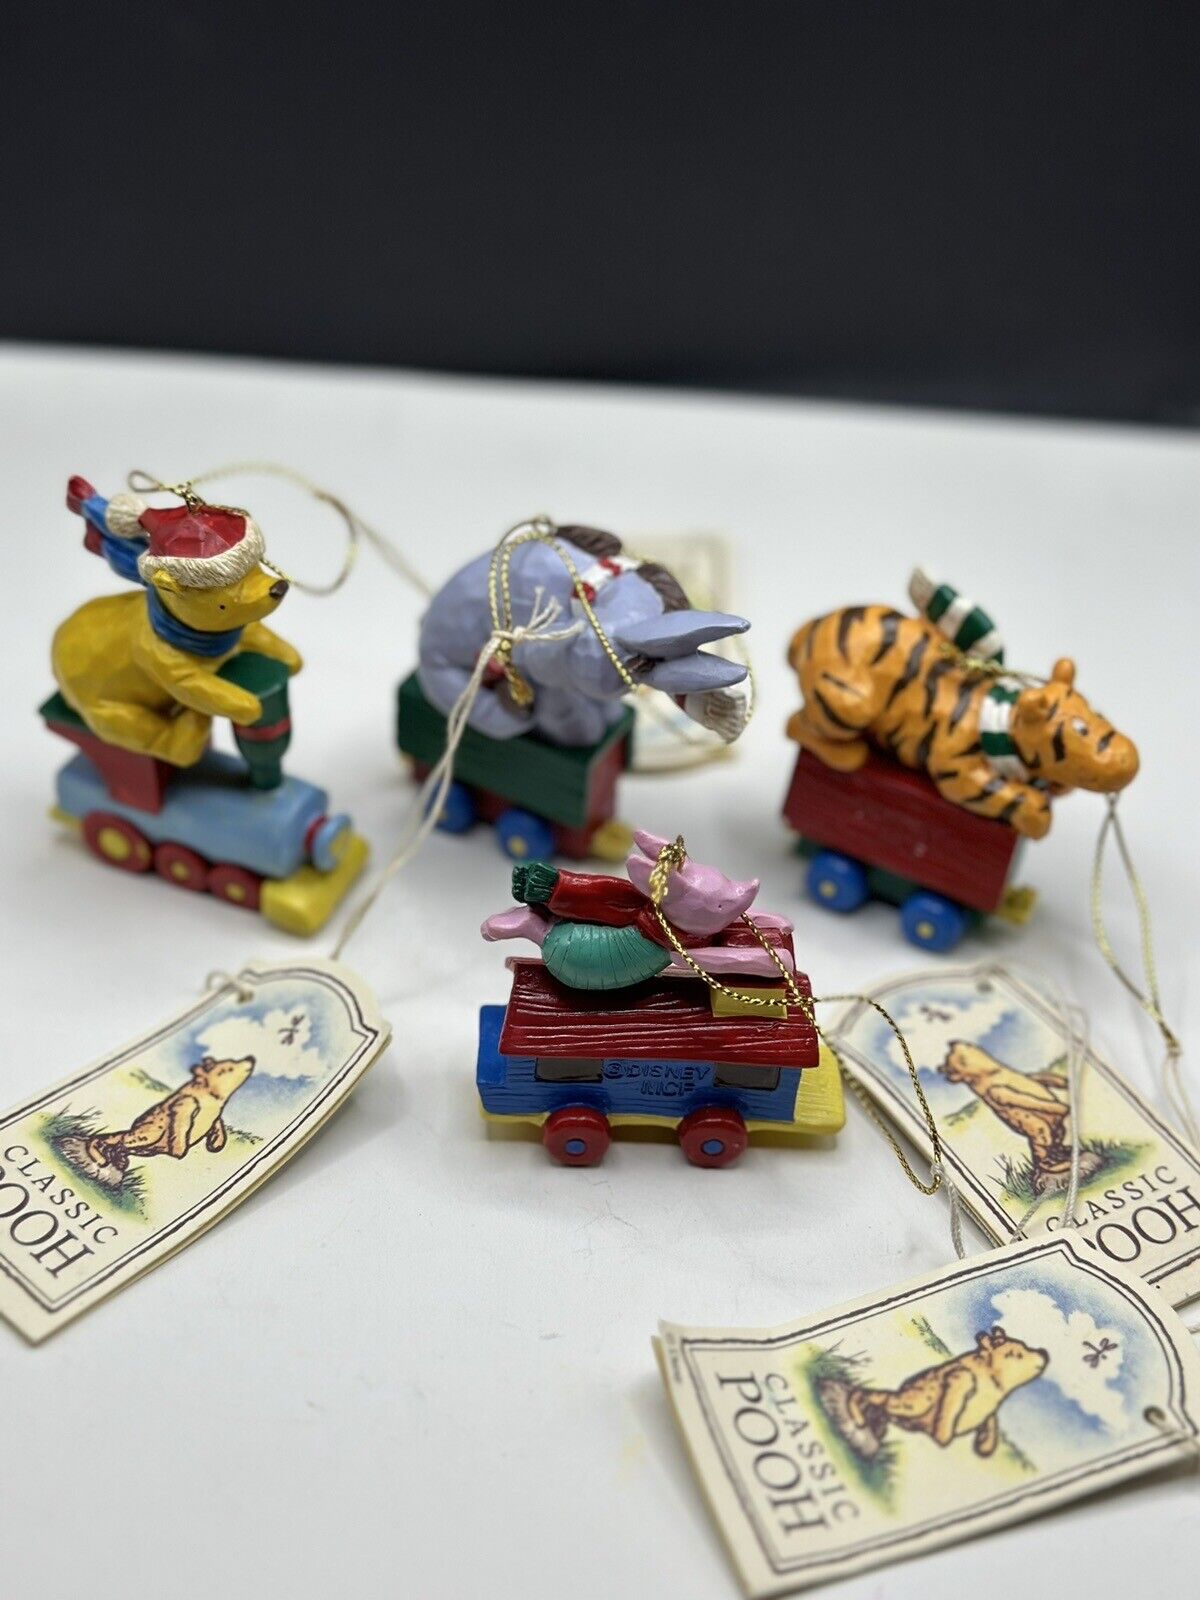 4 NWT CLASSIC Winnie The Pooh MIDWEST OF CANNON FALLS Christmas TRAIN Ornaments